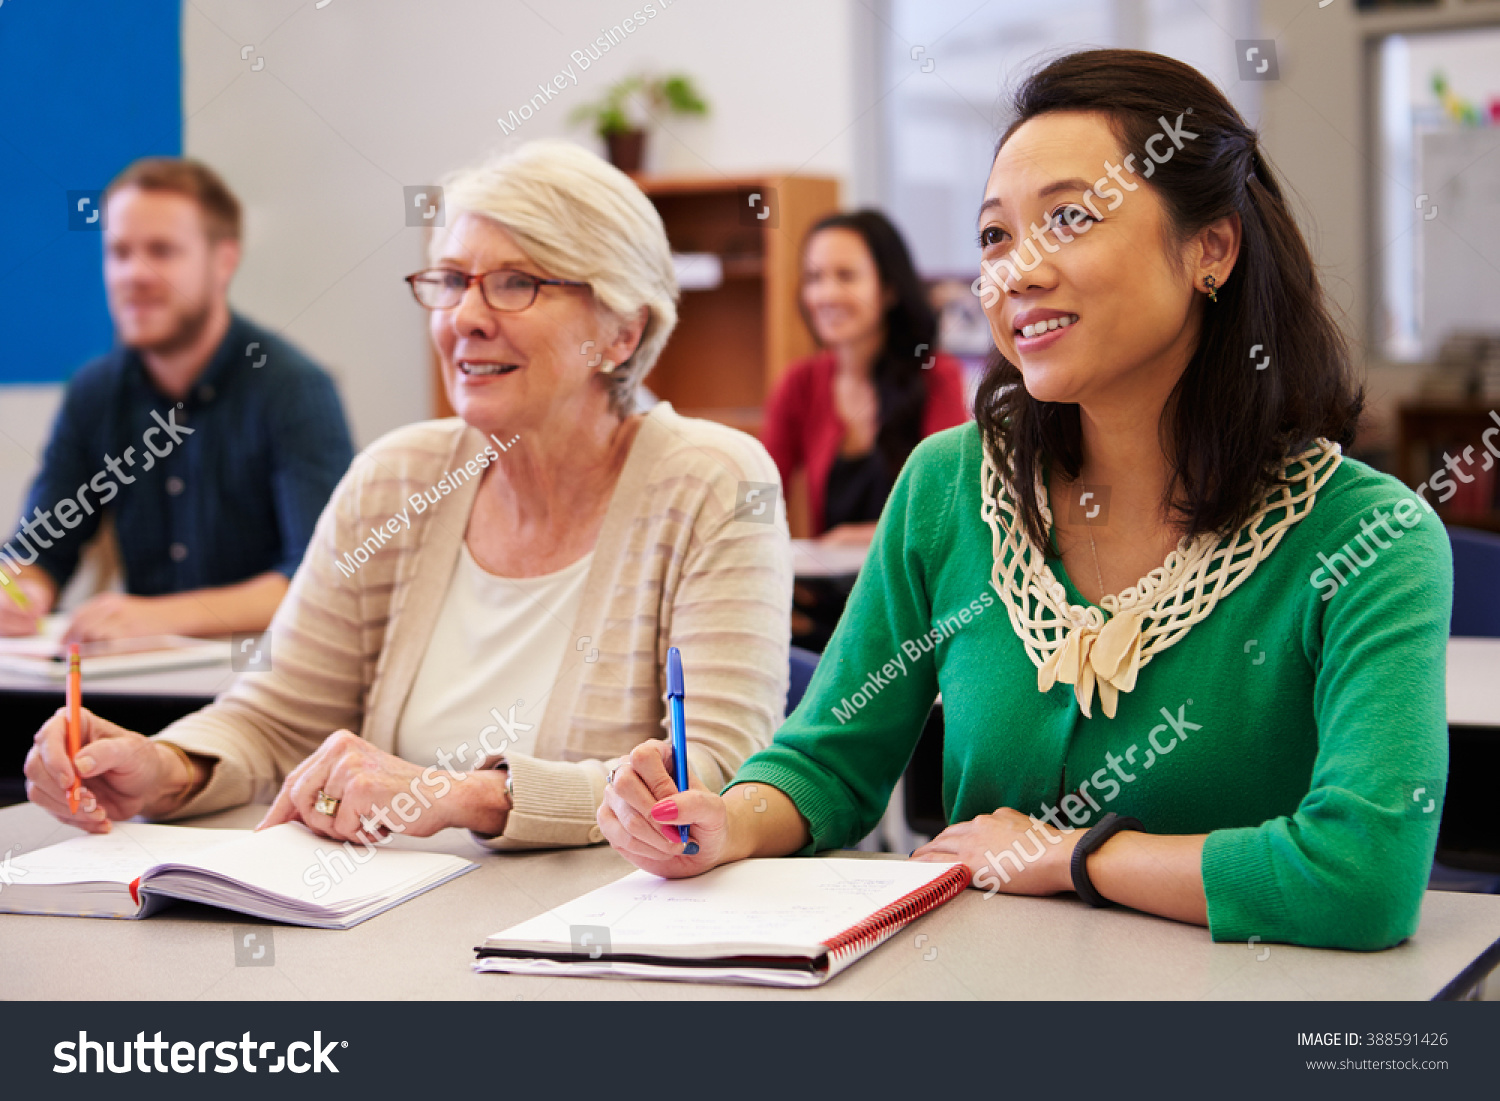 Two women sharing a desk at an adult education class look up #388591426